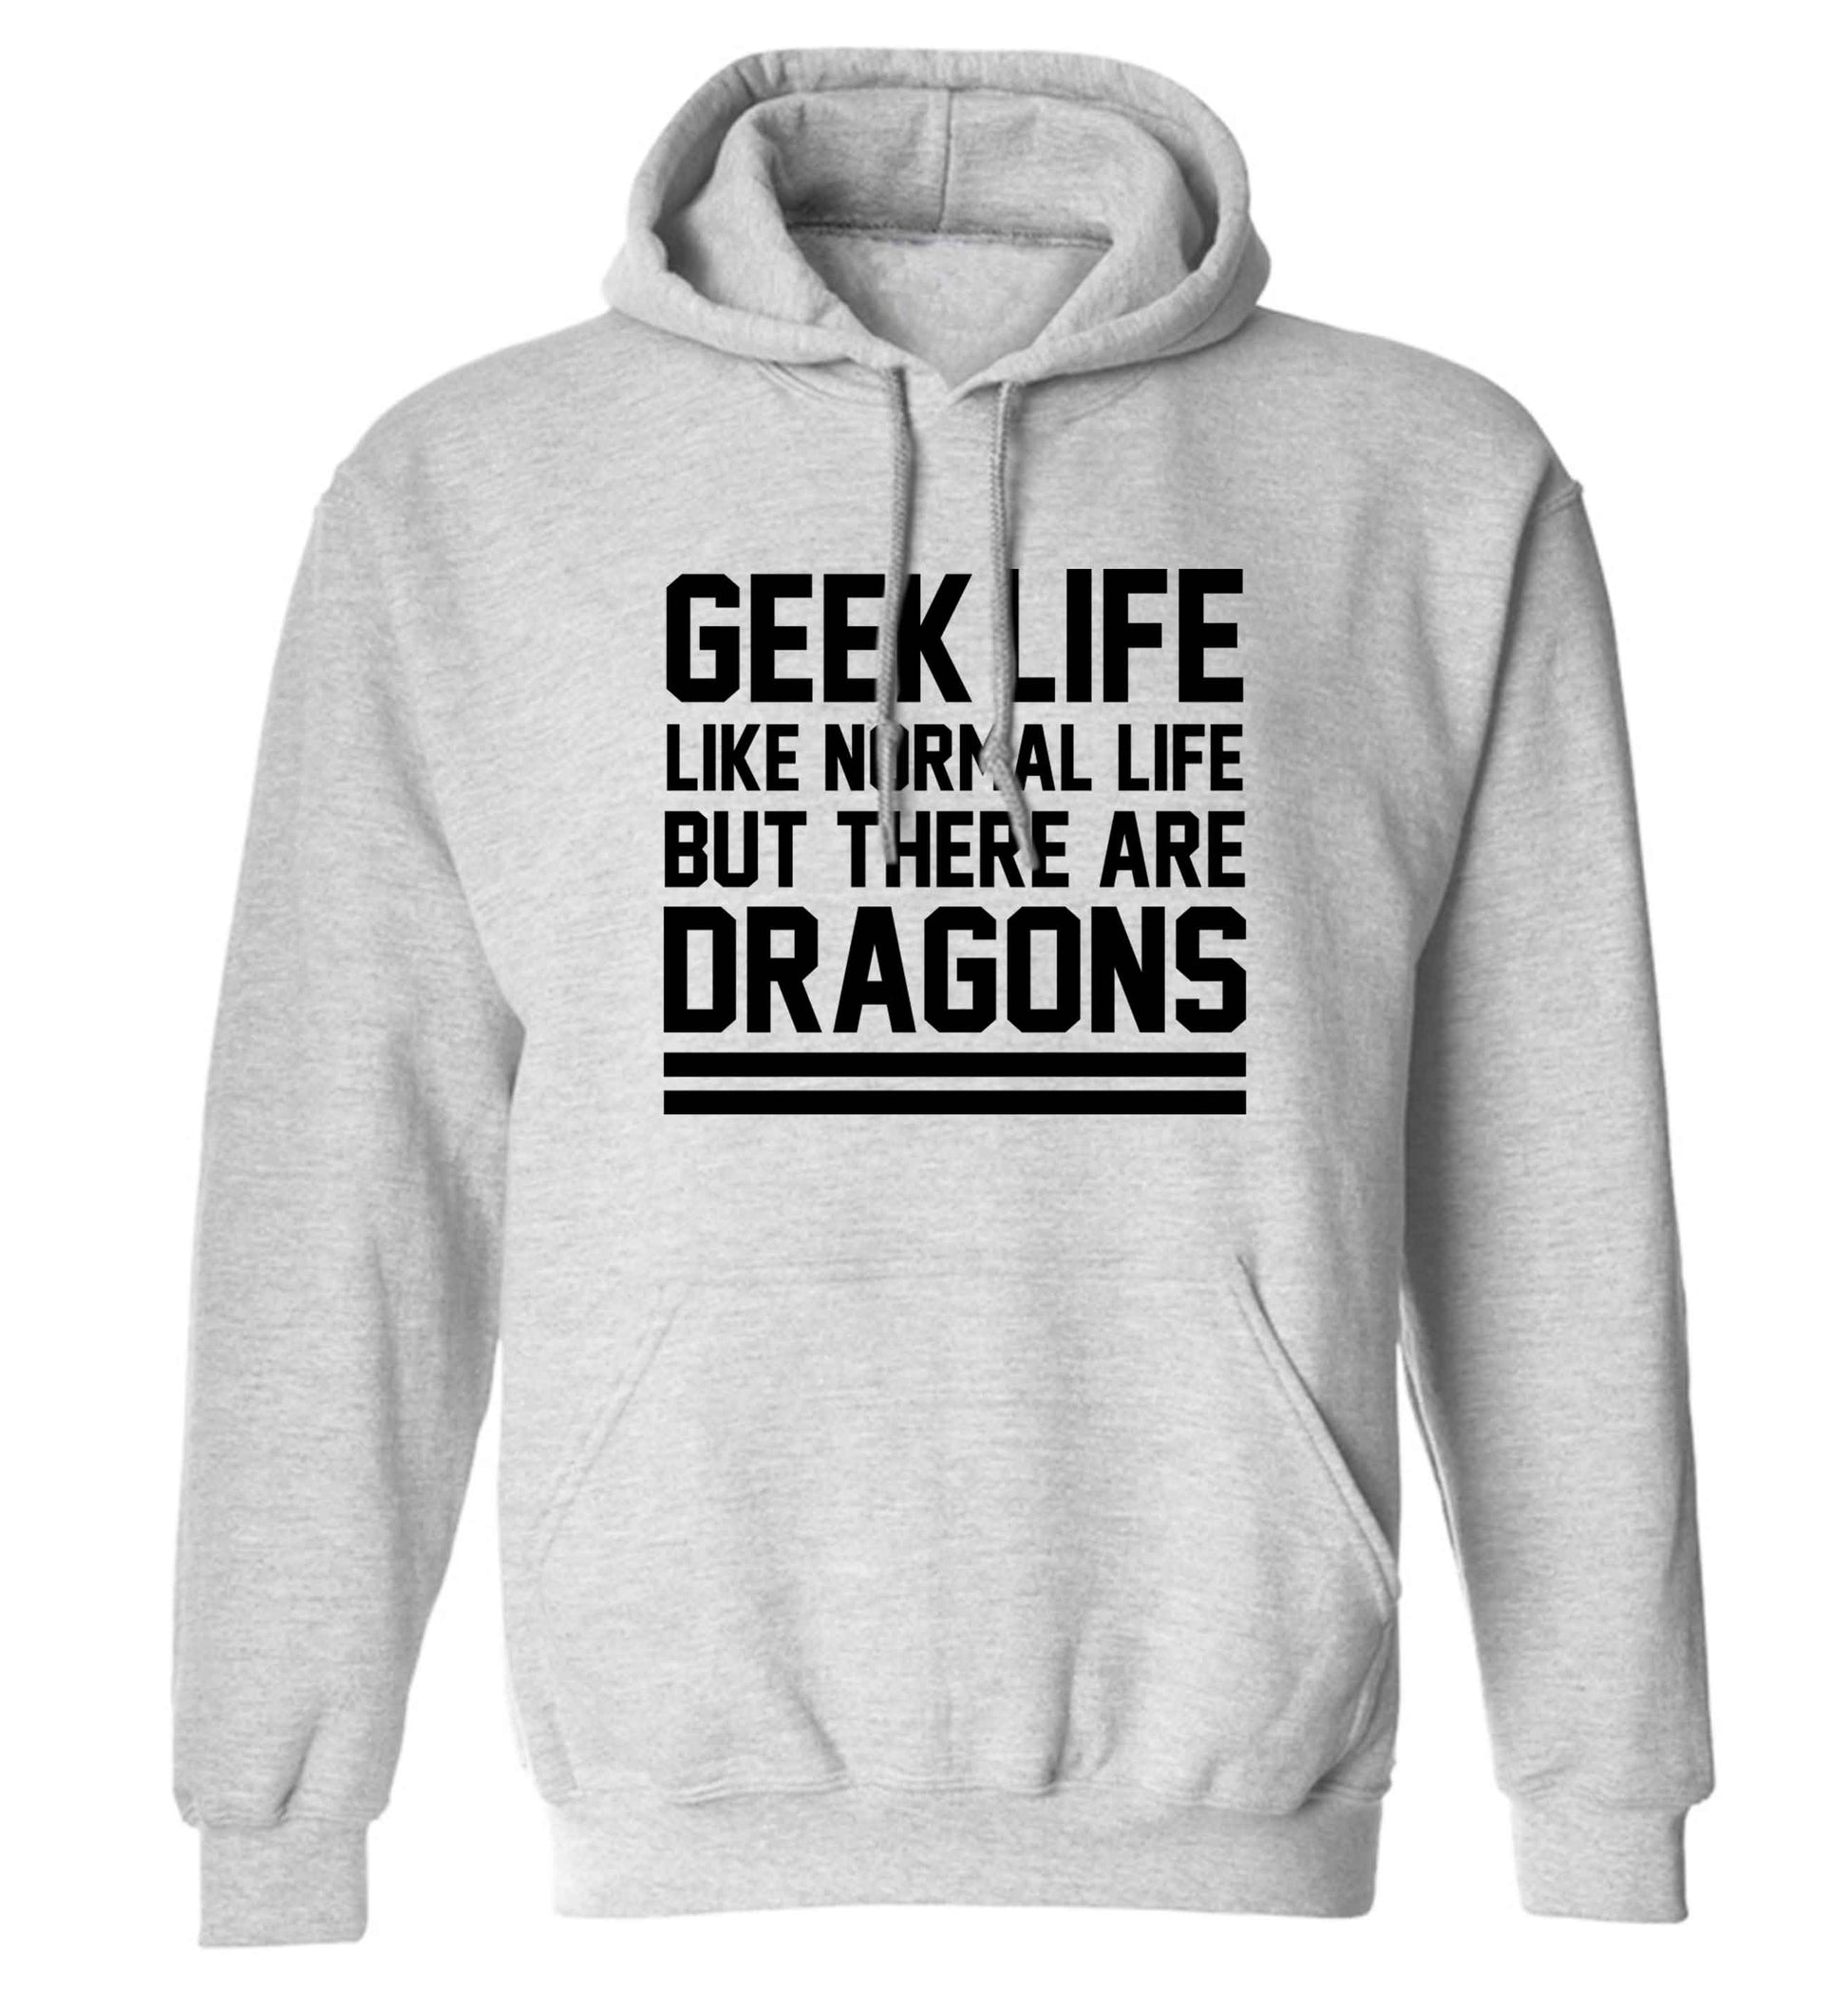 Geek life like normal life but there are dragons adults unisex grey hoodie 2XL